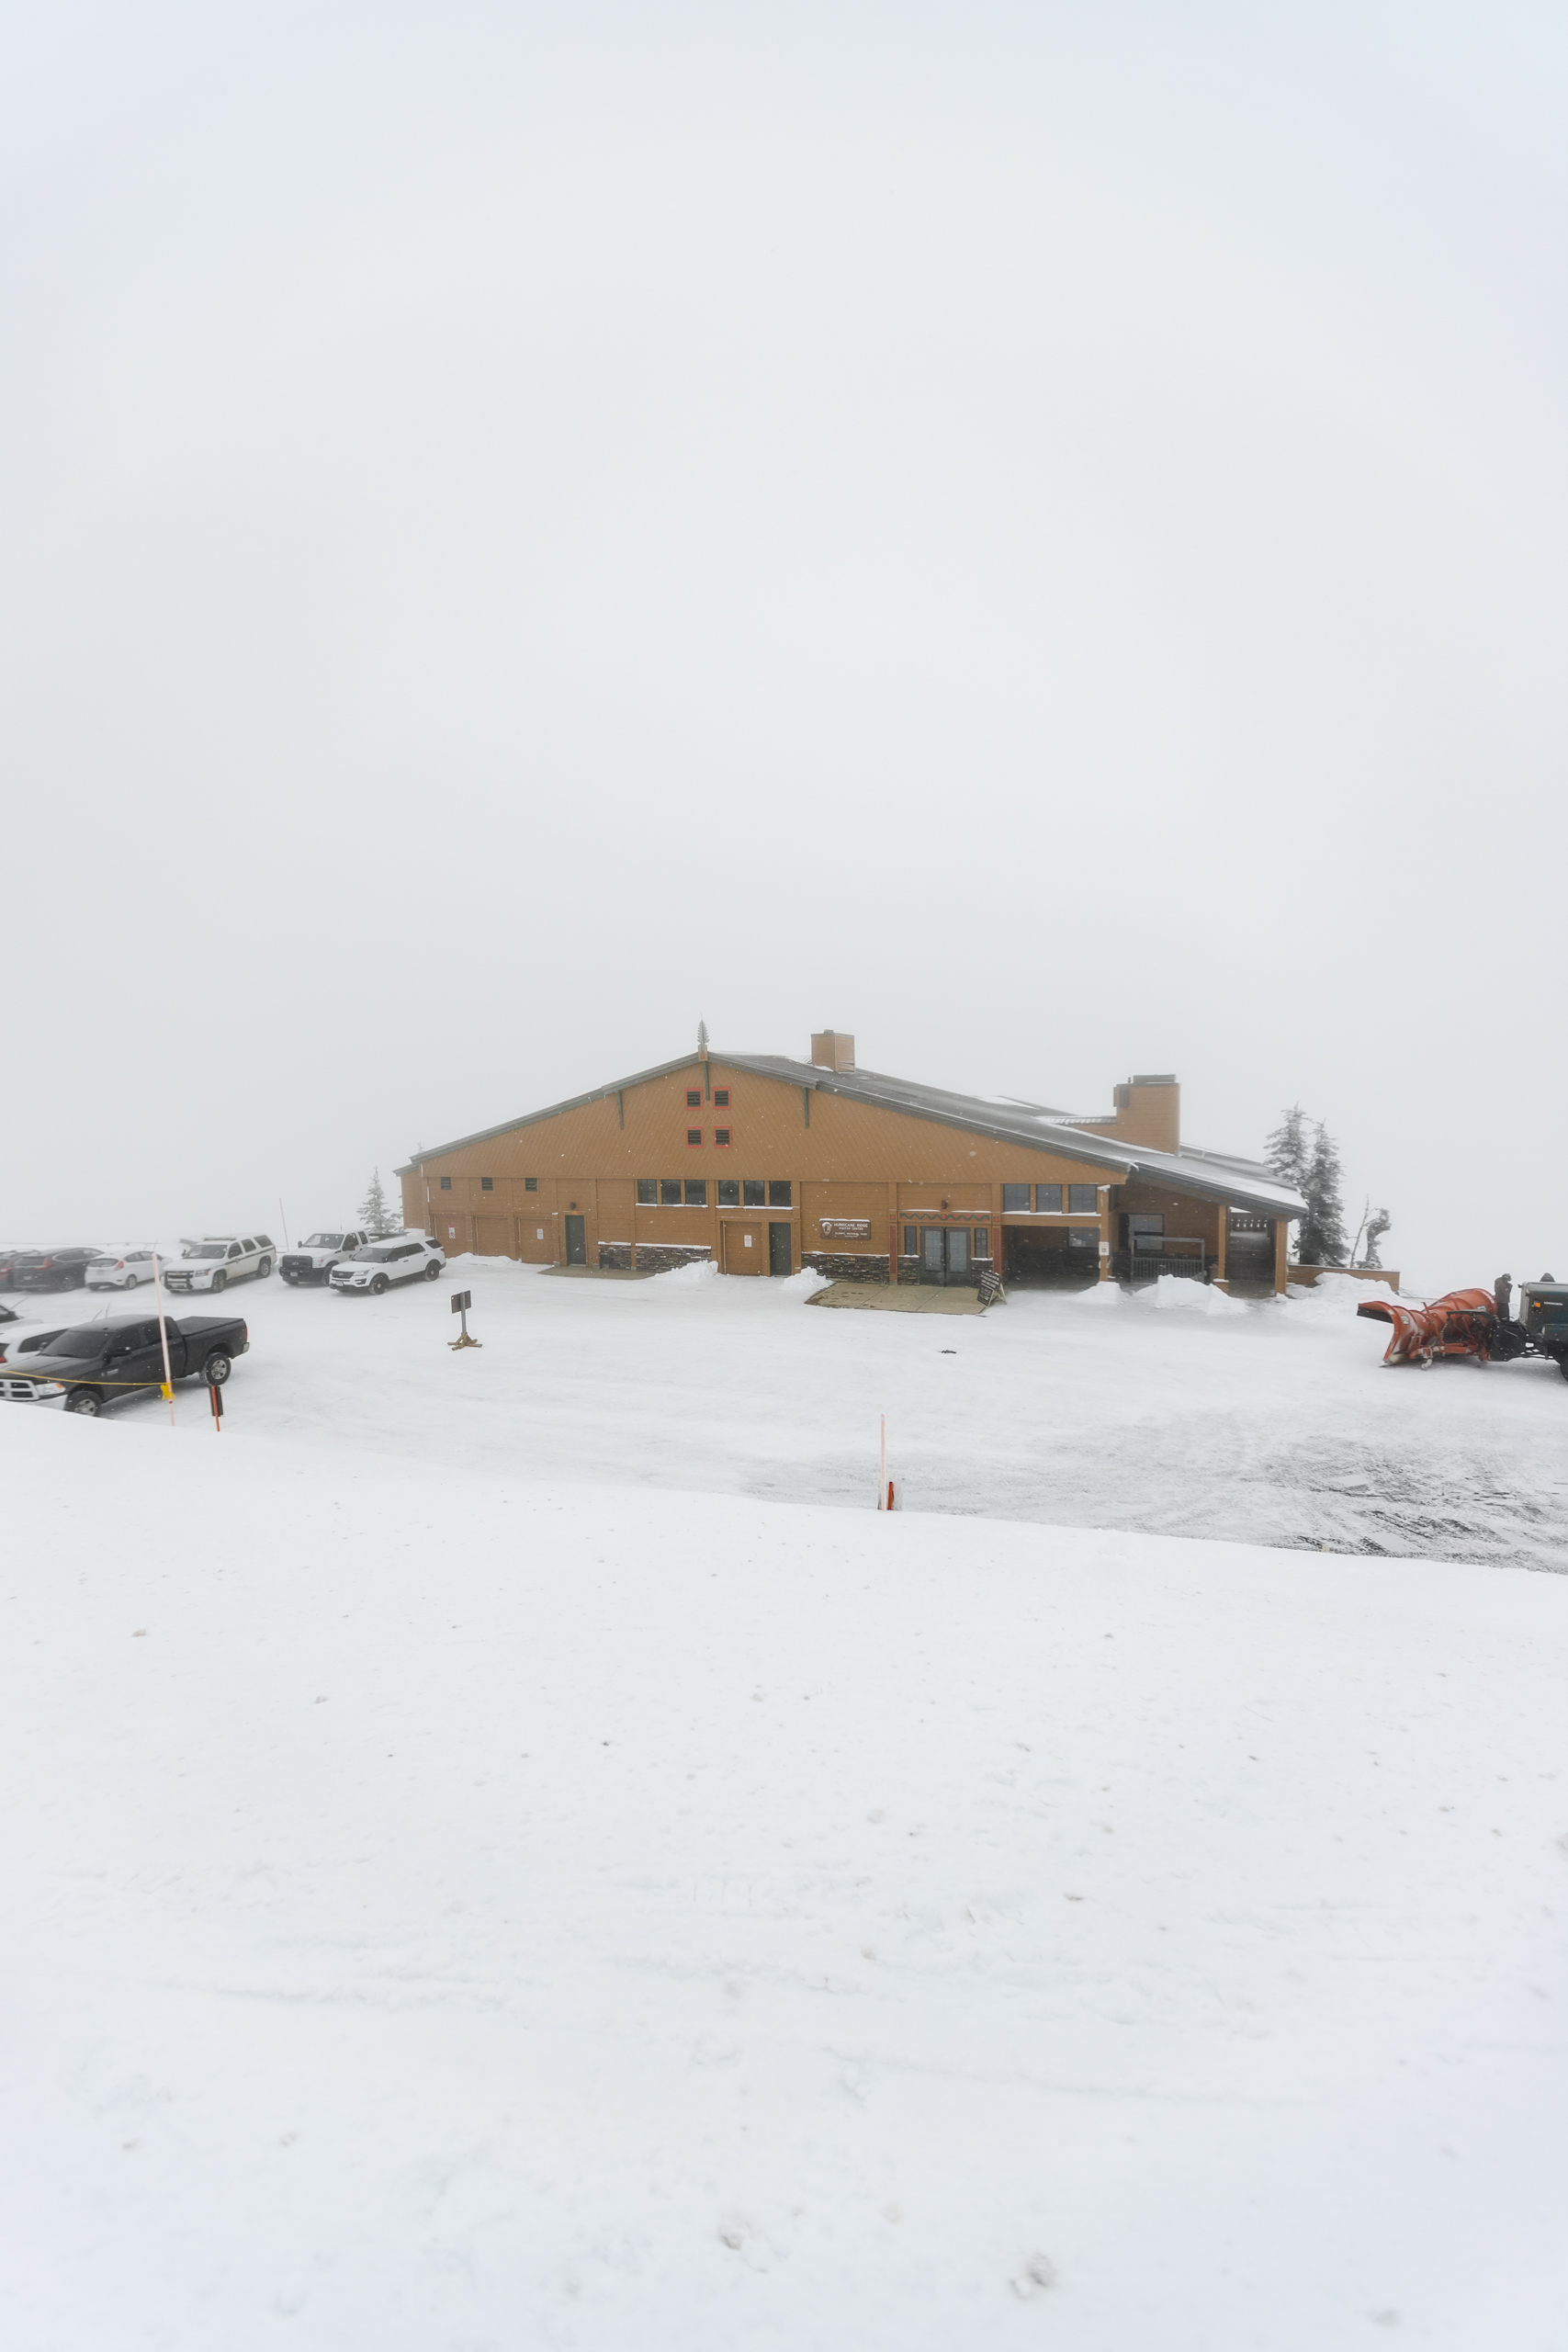 A wooden building in a snowy setting. Vehicles and a snowplow parked nearby.